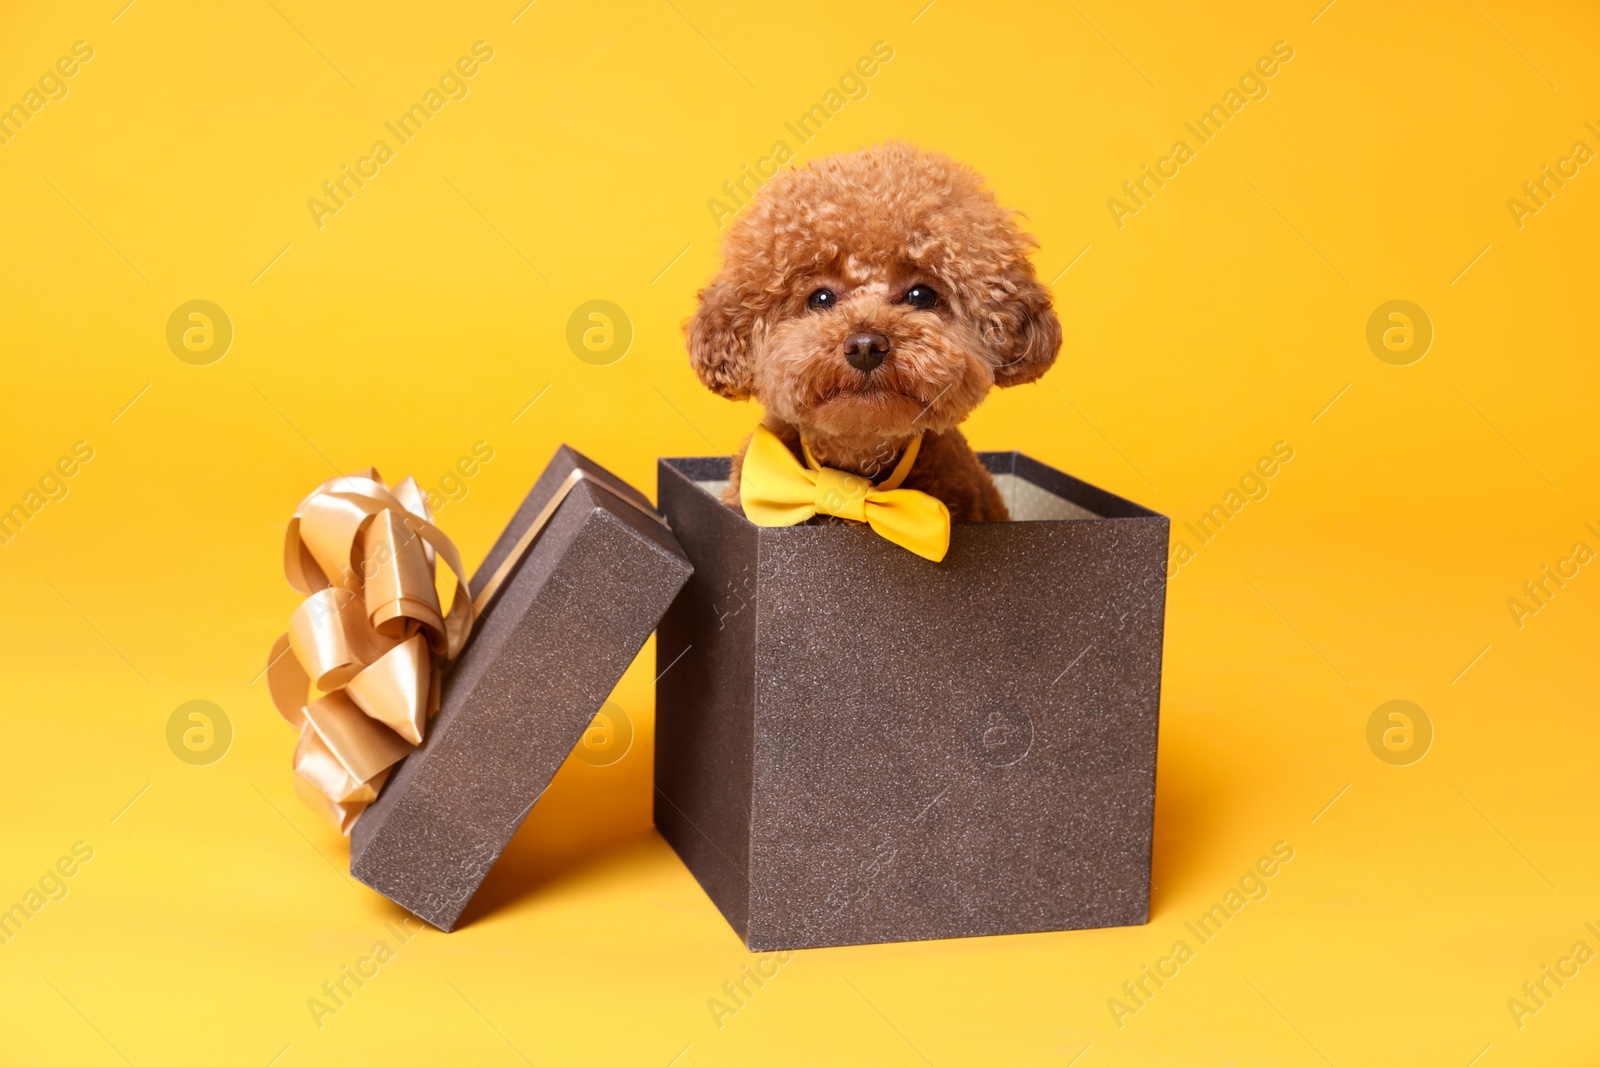 Photo of Cute Maltipoo dog with yellow bow tie in gift box on orange background